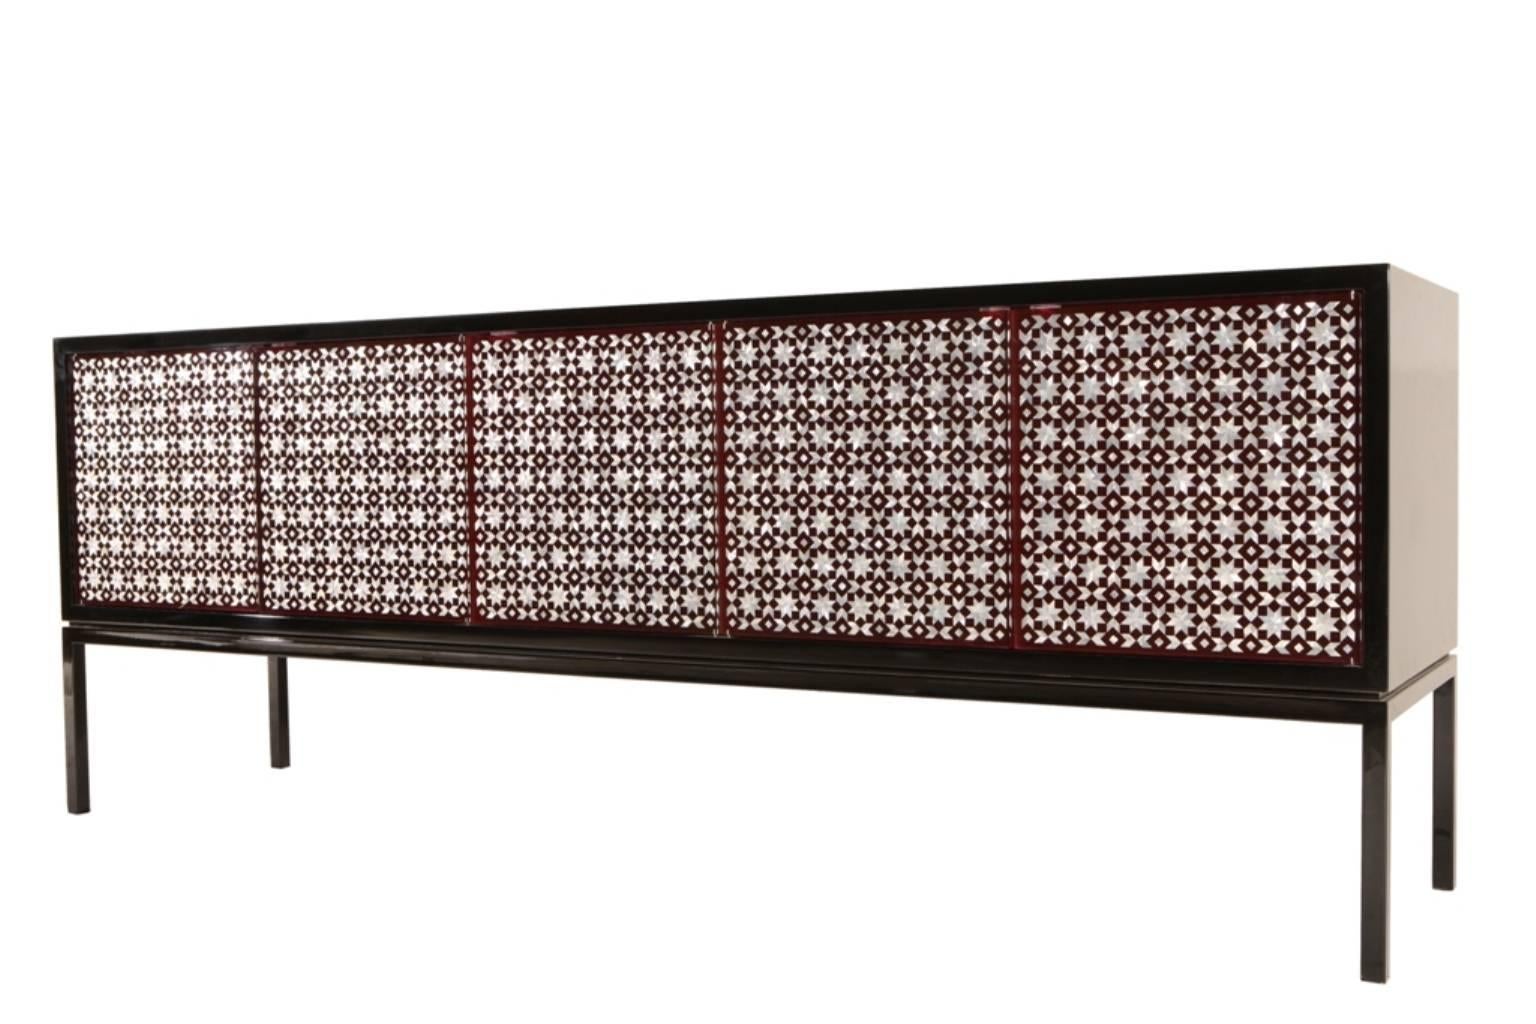 Le Grand Buffet cabinet sits with carefully balanced proportion on a steel frame. Body is walnut in wood finishes or lacquer colors. Traditional technique is used to inlay mother-of-pearl into plexiglas doors, obscuring storage contents while still